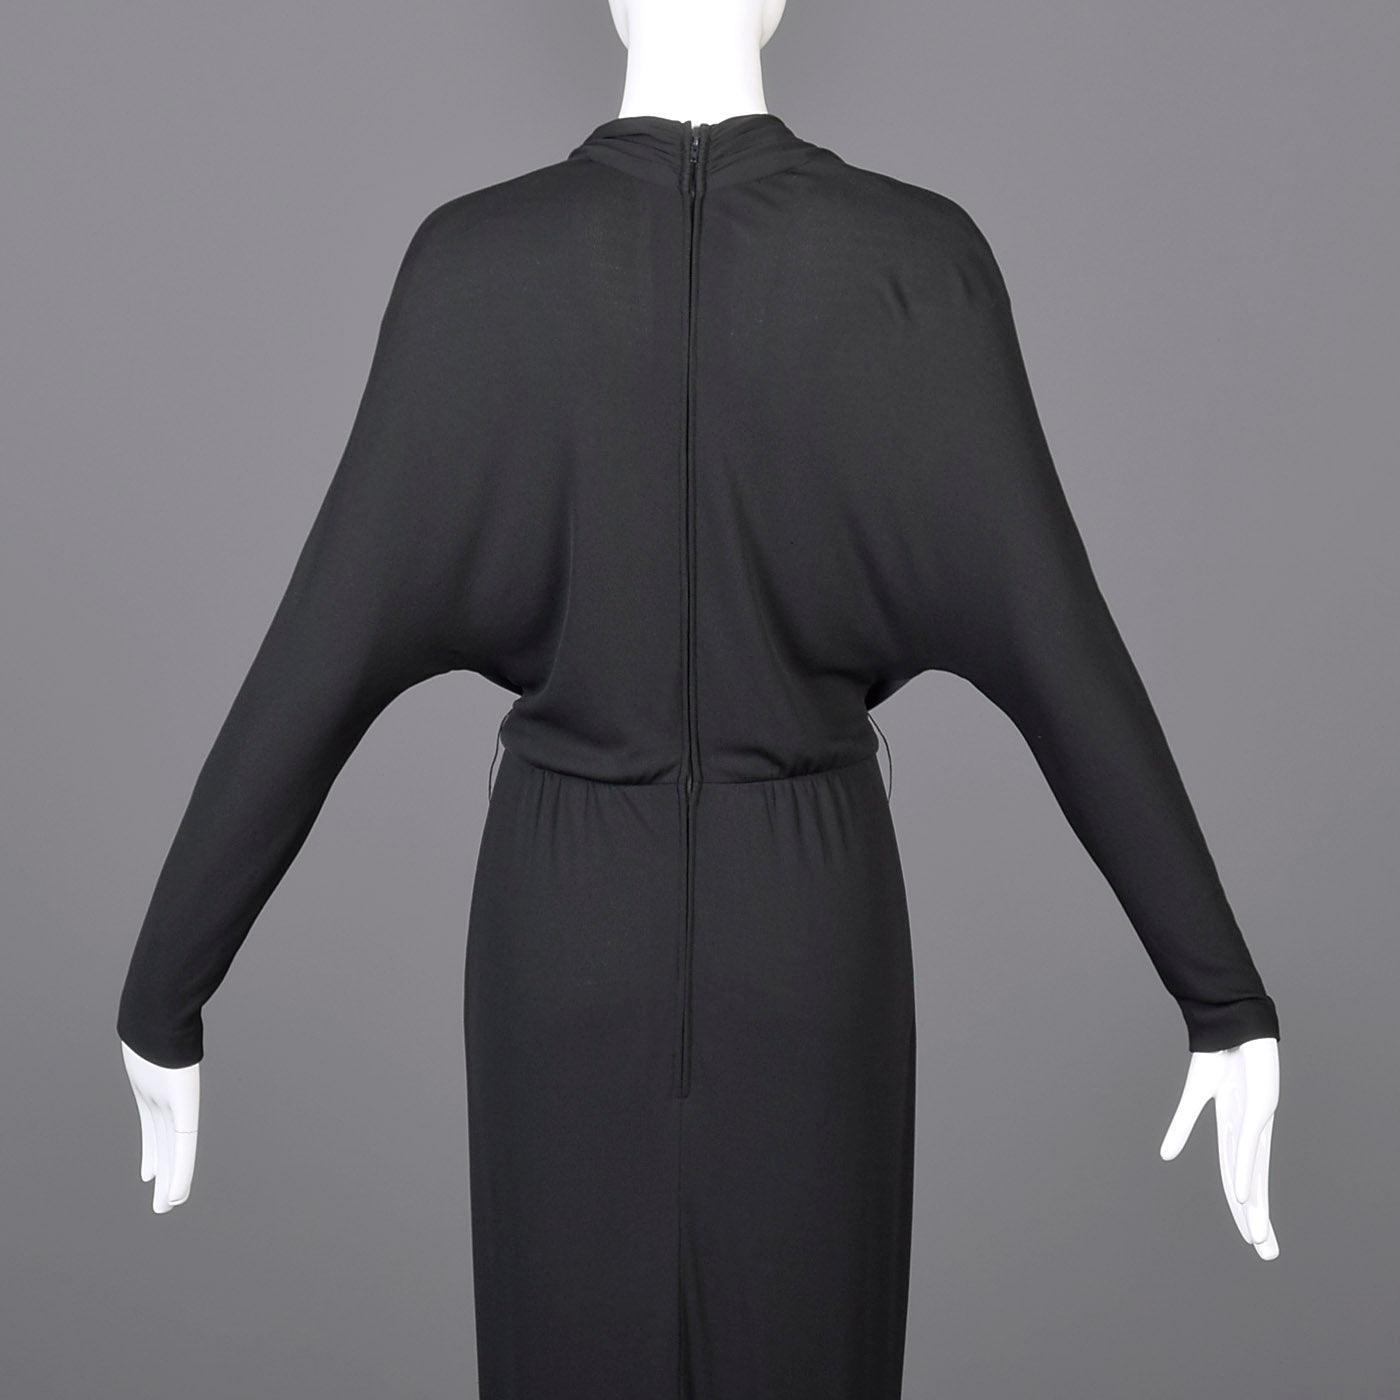 Extraordinary 1970s Bill Tice for Malcolm Starr Black Evening Gown with Plunging Neckline